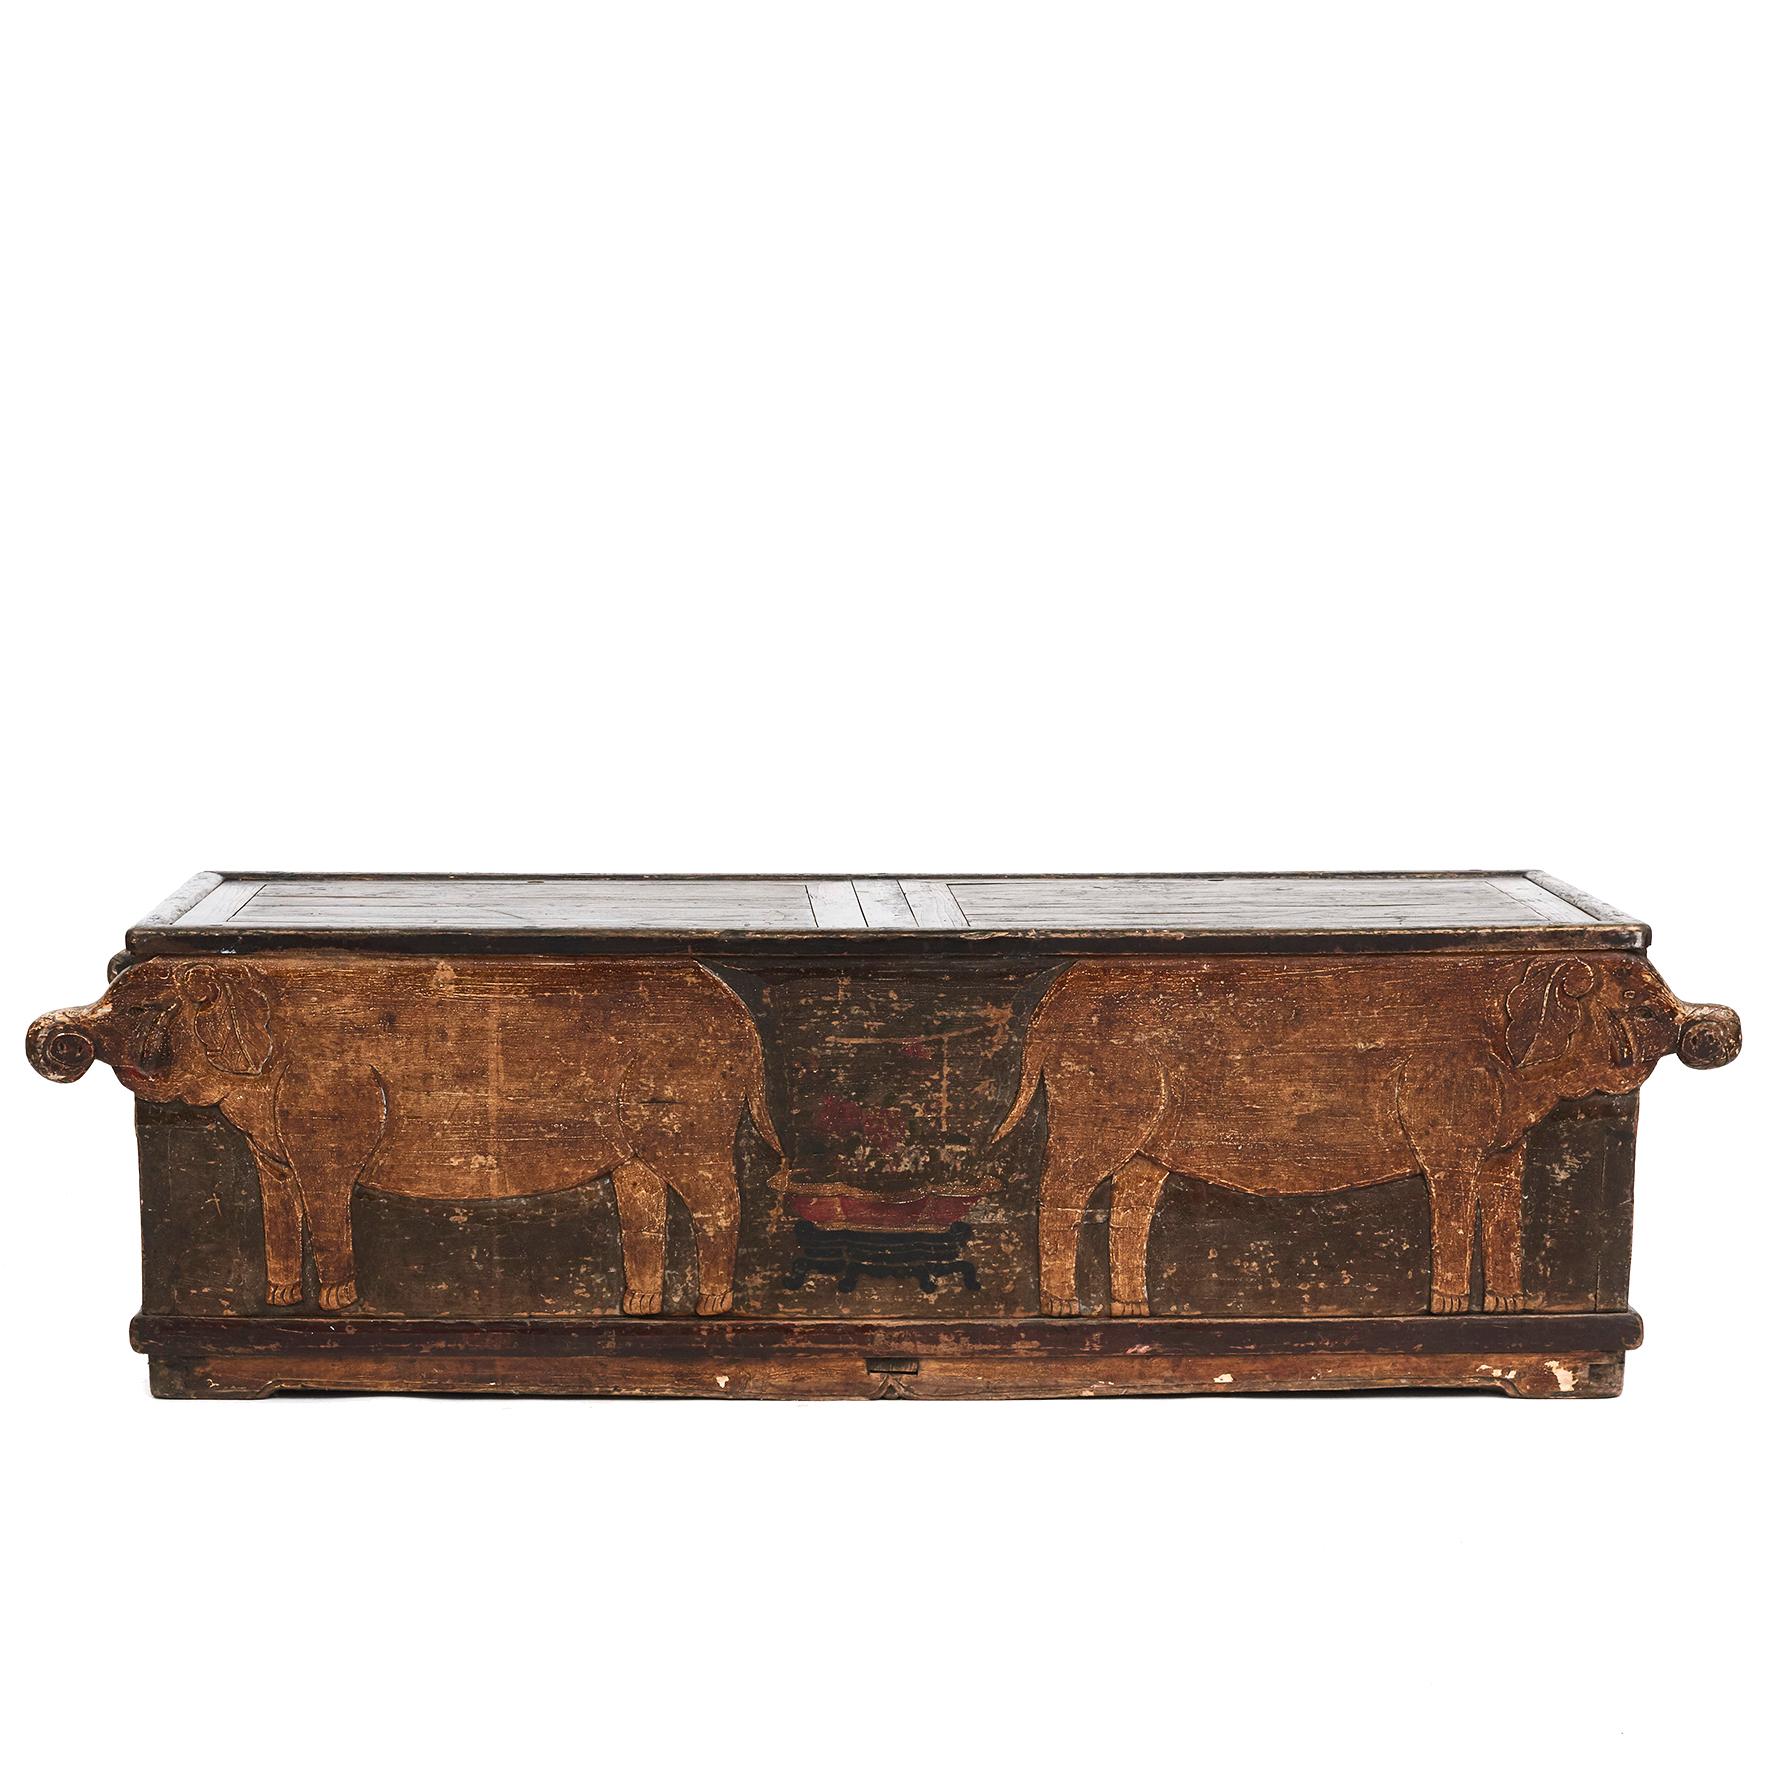 Artistic storage bench, naïve and charming in its design.
Shape of elephants in amber lacquer between elephants, at the end decorated with vases and flowers in polychrome lacquer colors. Two lids on top of the bench
Untouched original condition with